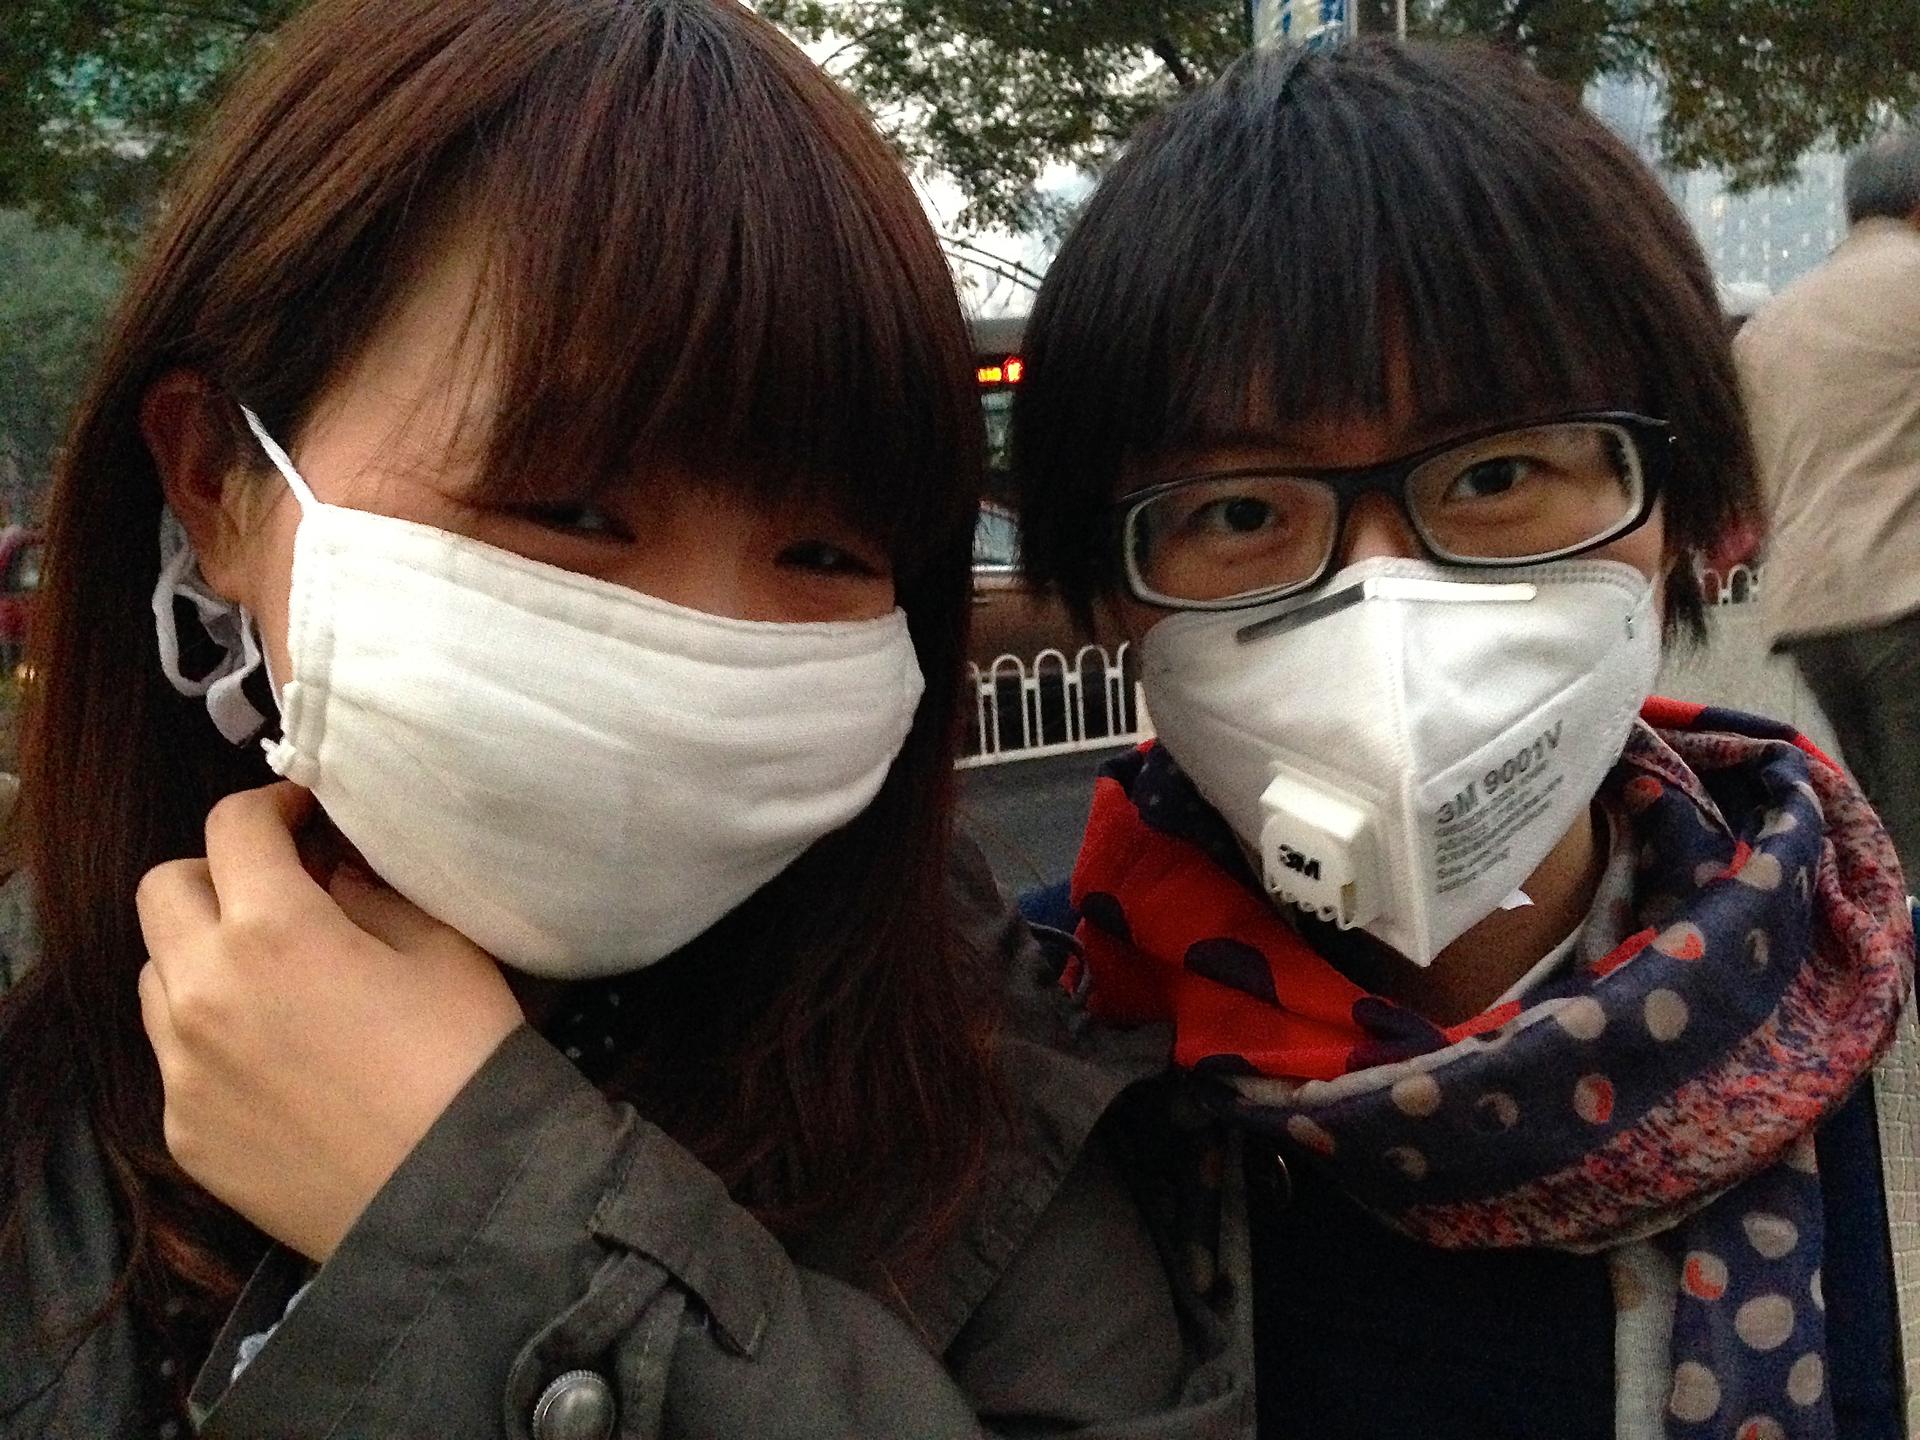 Two office workers in Beijing told me they're thinking about moving out of the city because of the air pollution. 